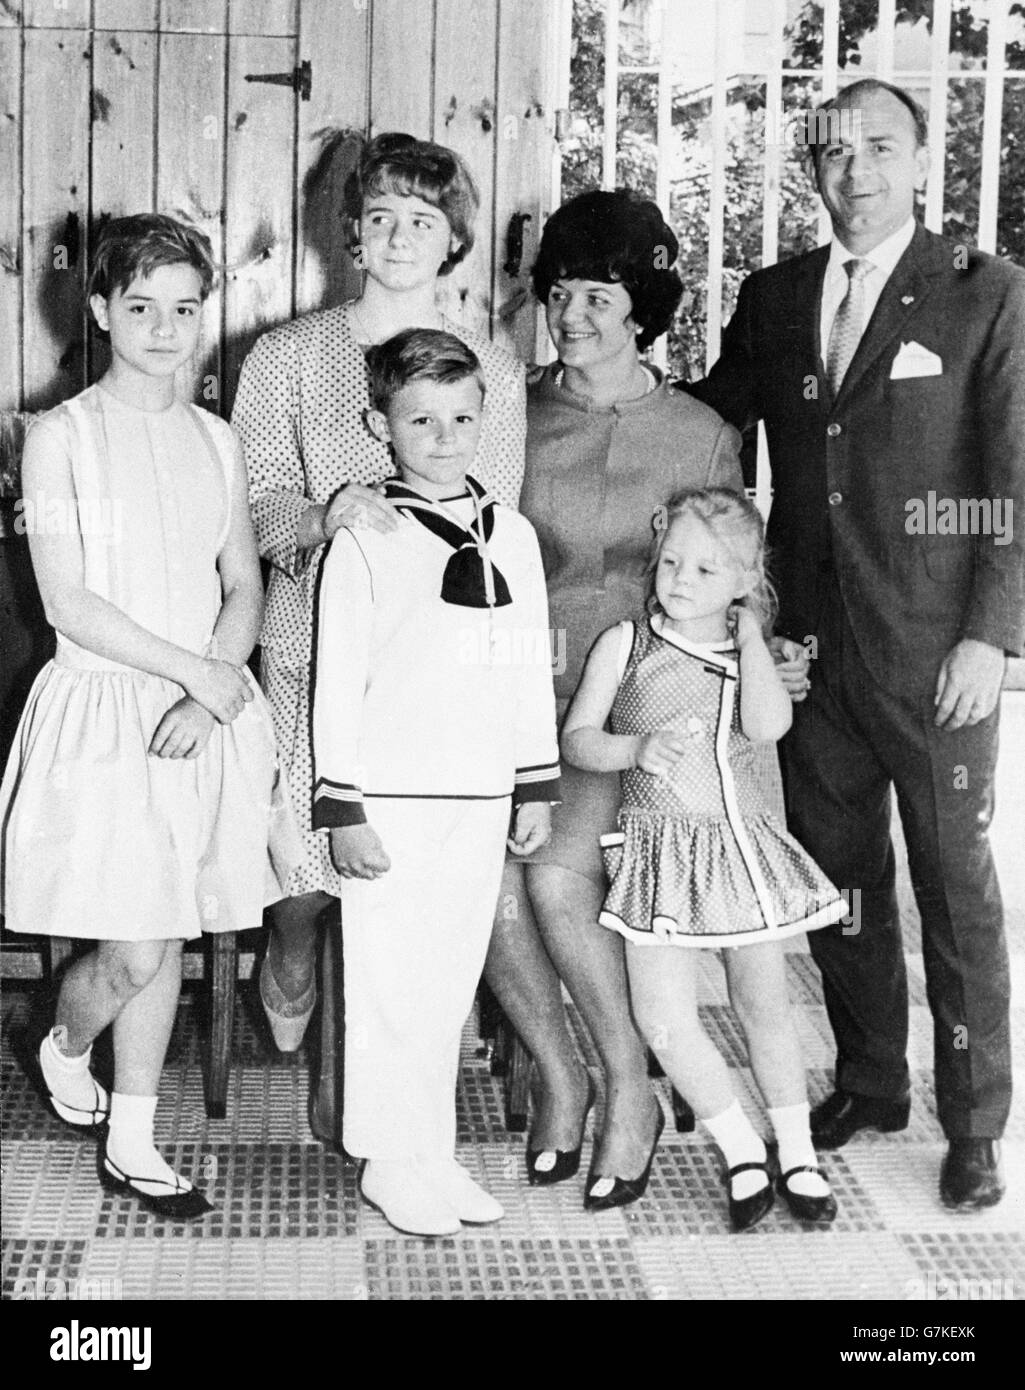 Real Madrid star Alfredo di Stefano (r) avec sa famille Banque D'Images